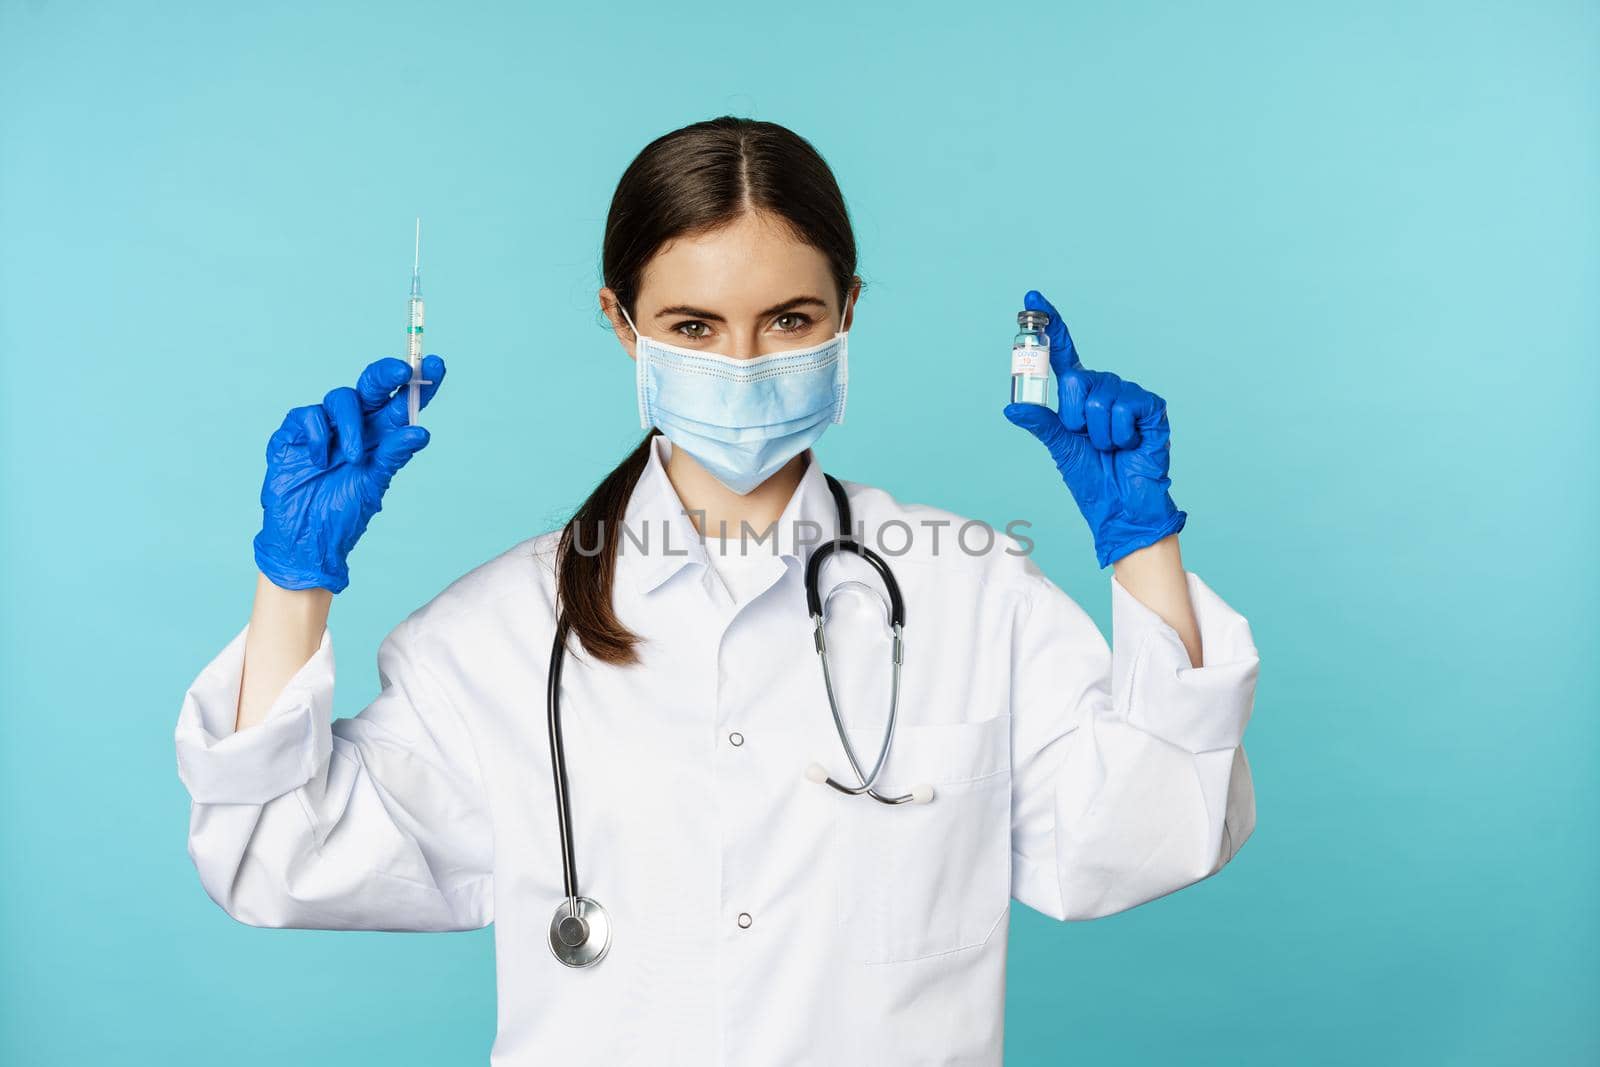 Smiling medical staff, doctor in face mask and rubber gloves, showing syringe and vaccine from covid-19 pandemic, standing over blue background.